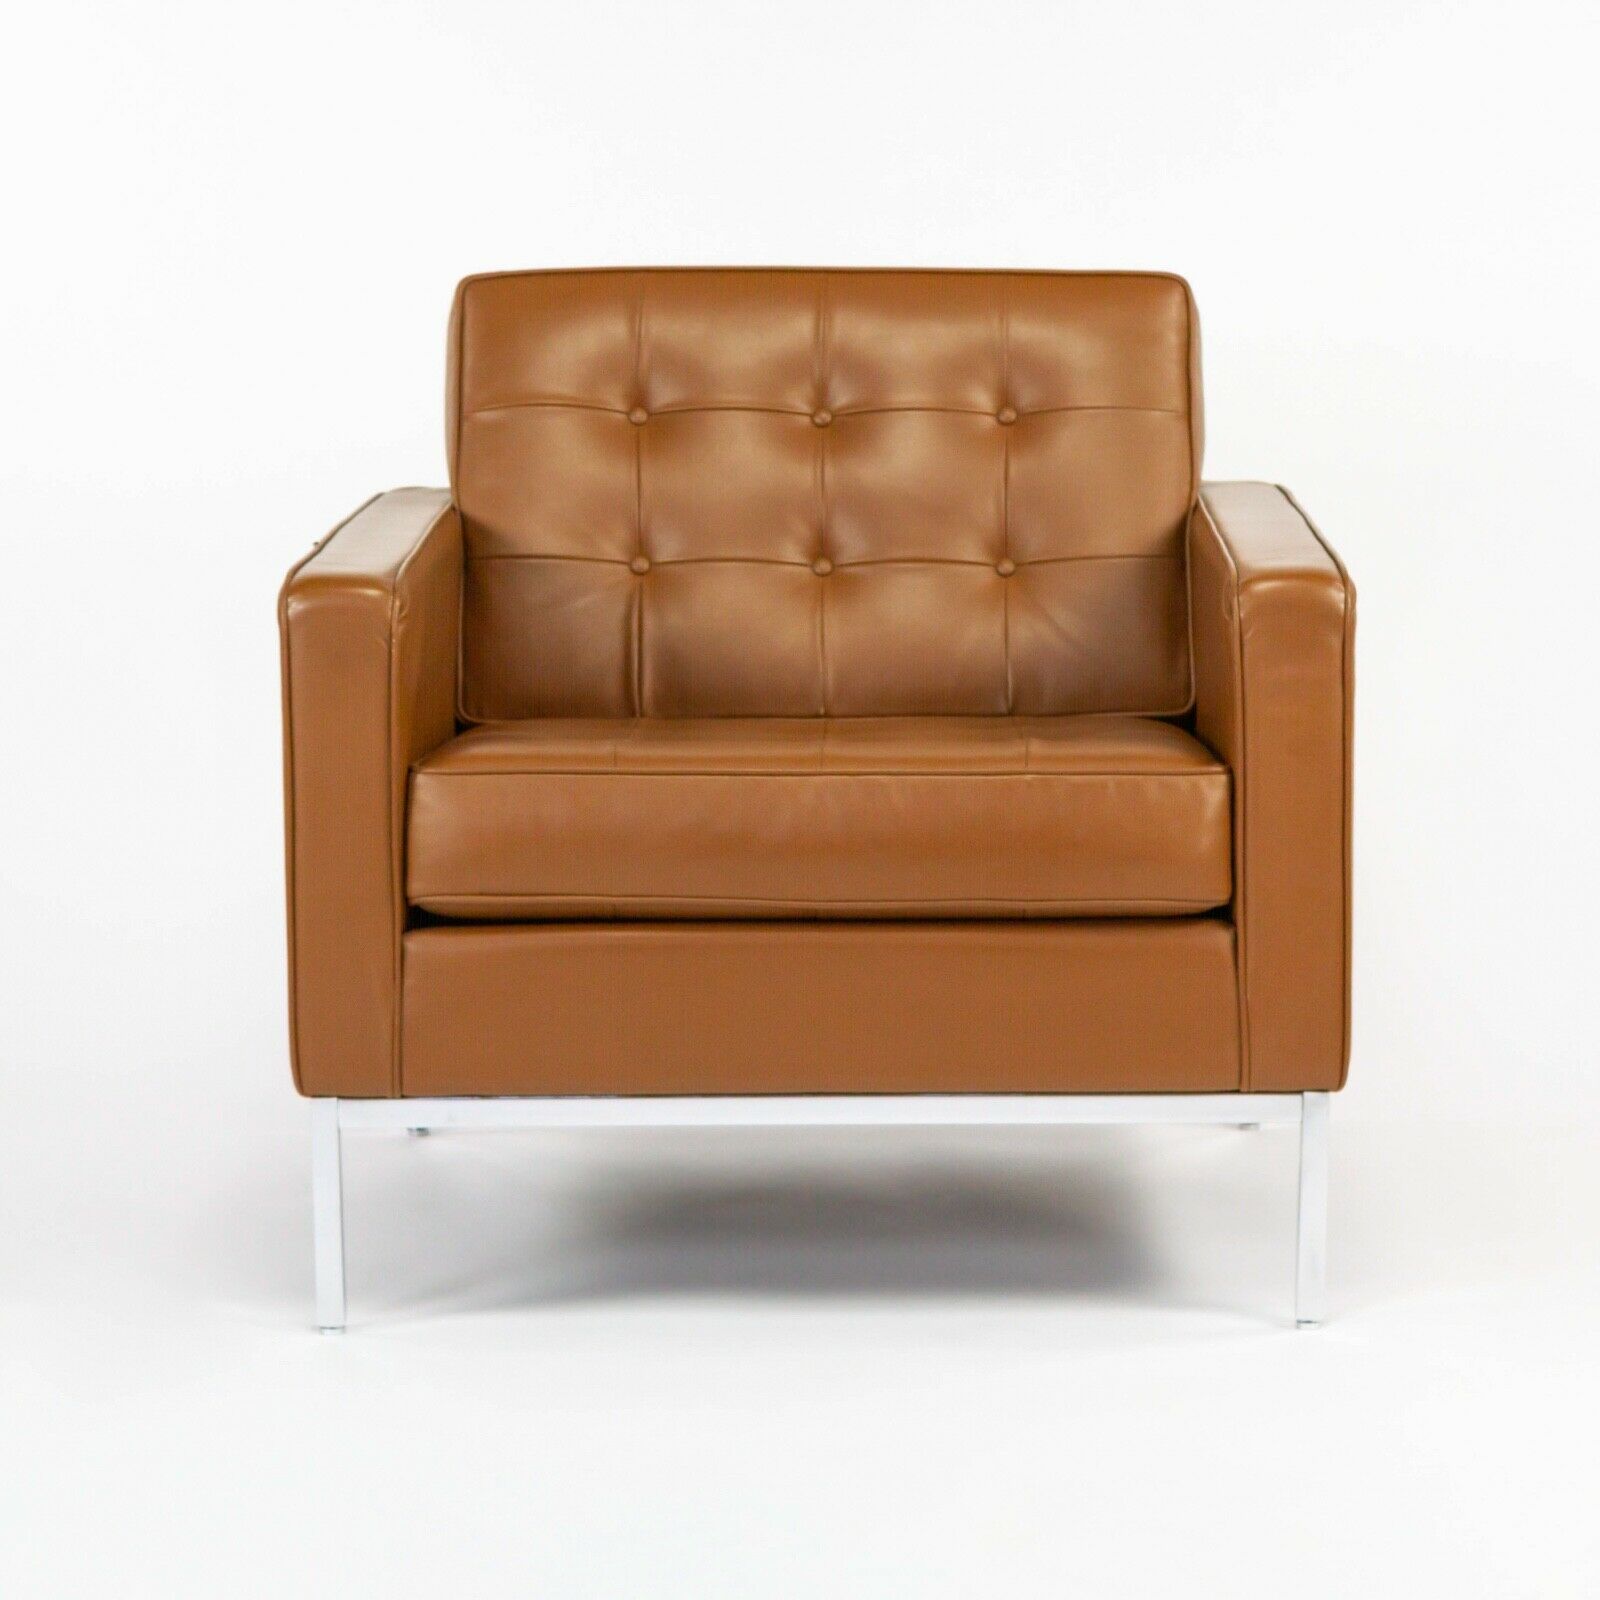 2012 Pair of Florence Knoll Club / Lounge Chairs in Dark Tan or Caramel Leather